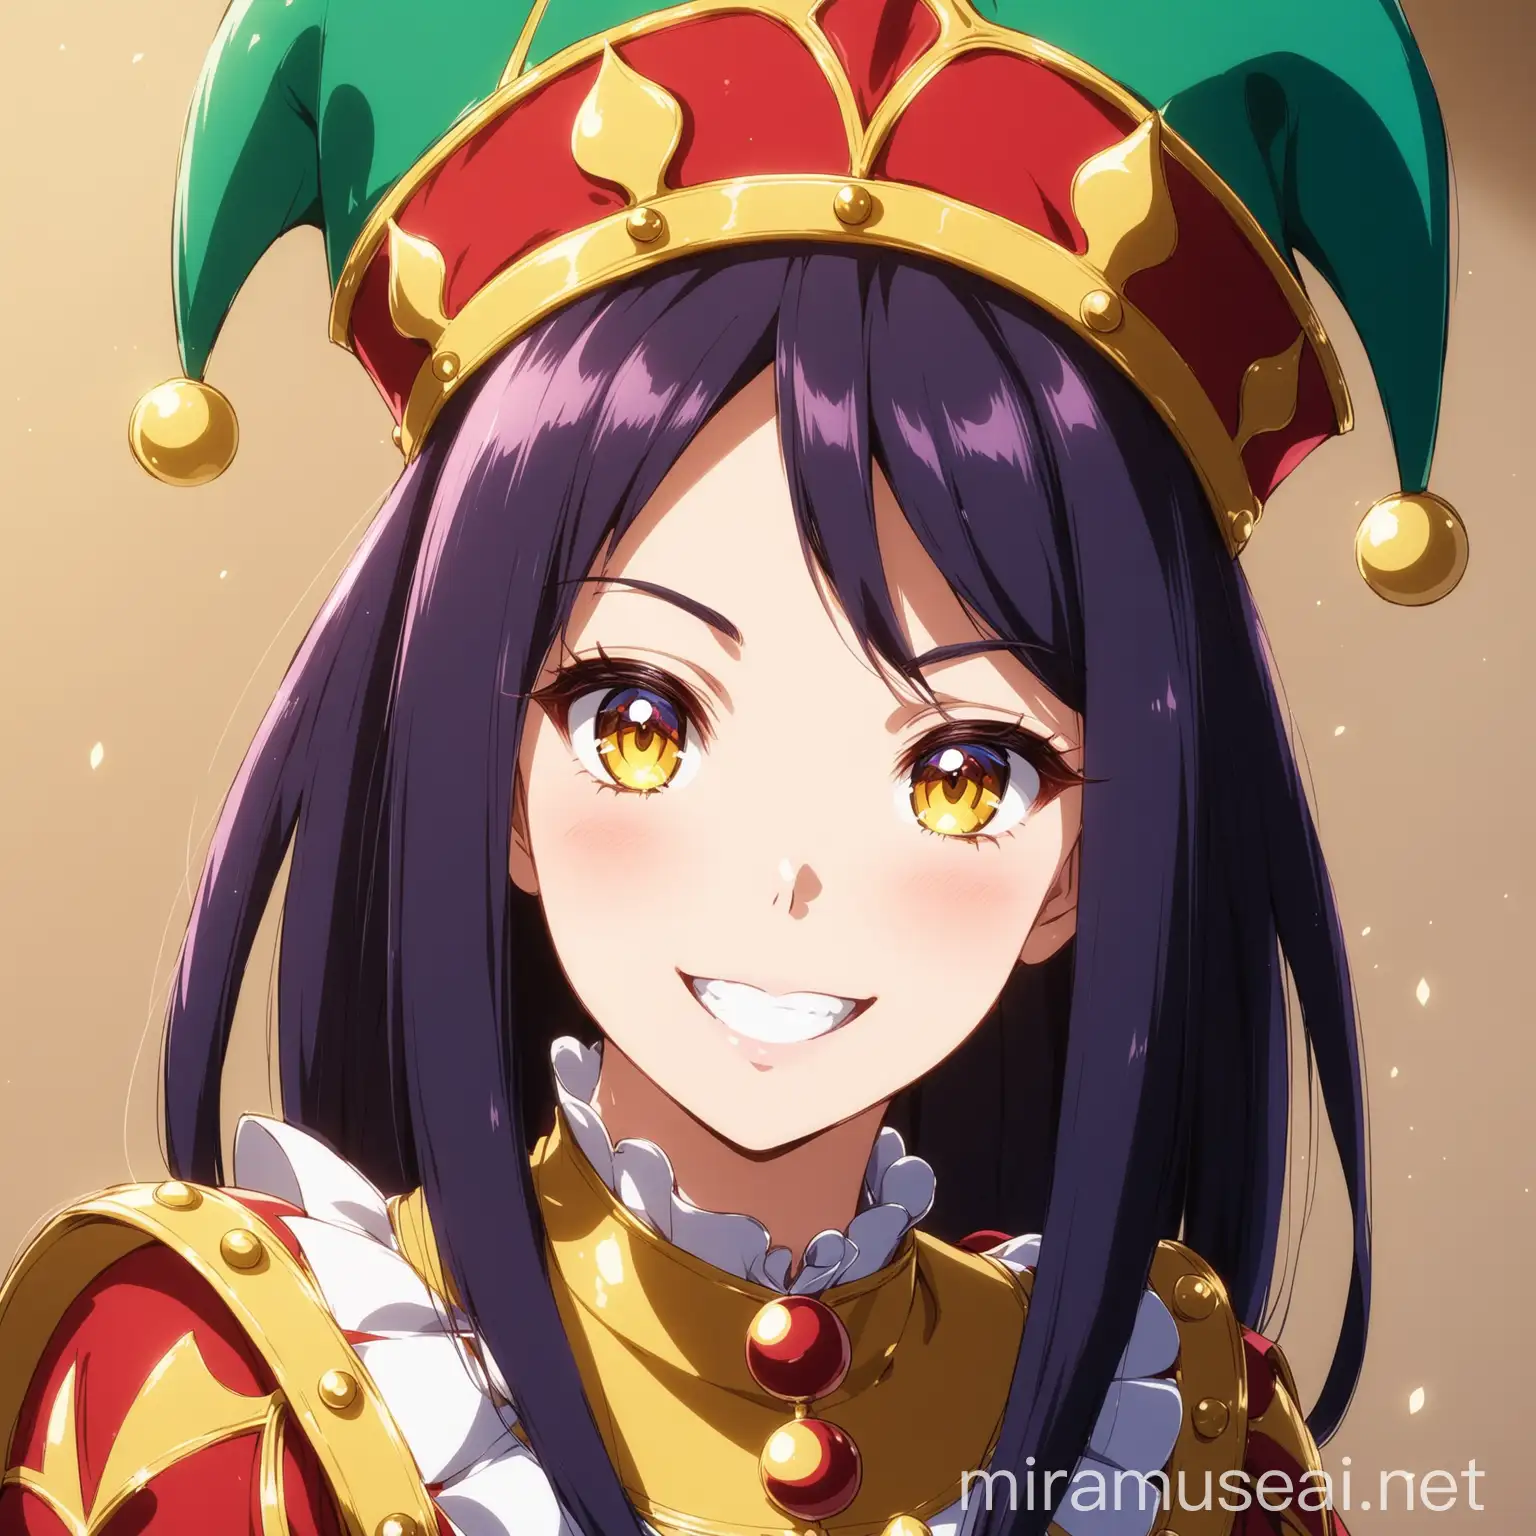 a court jester woman in anime